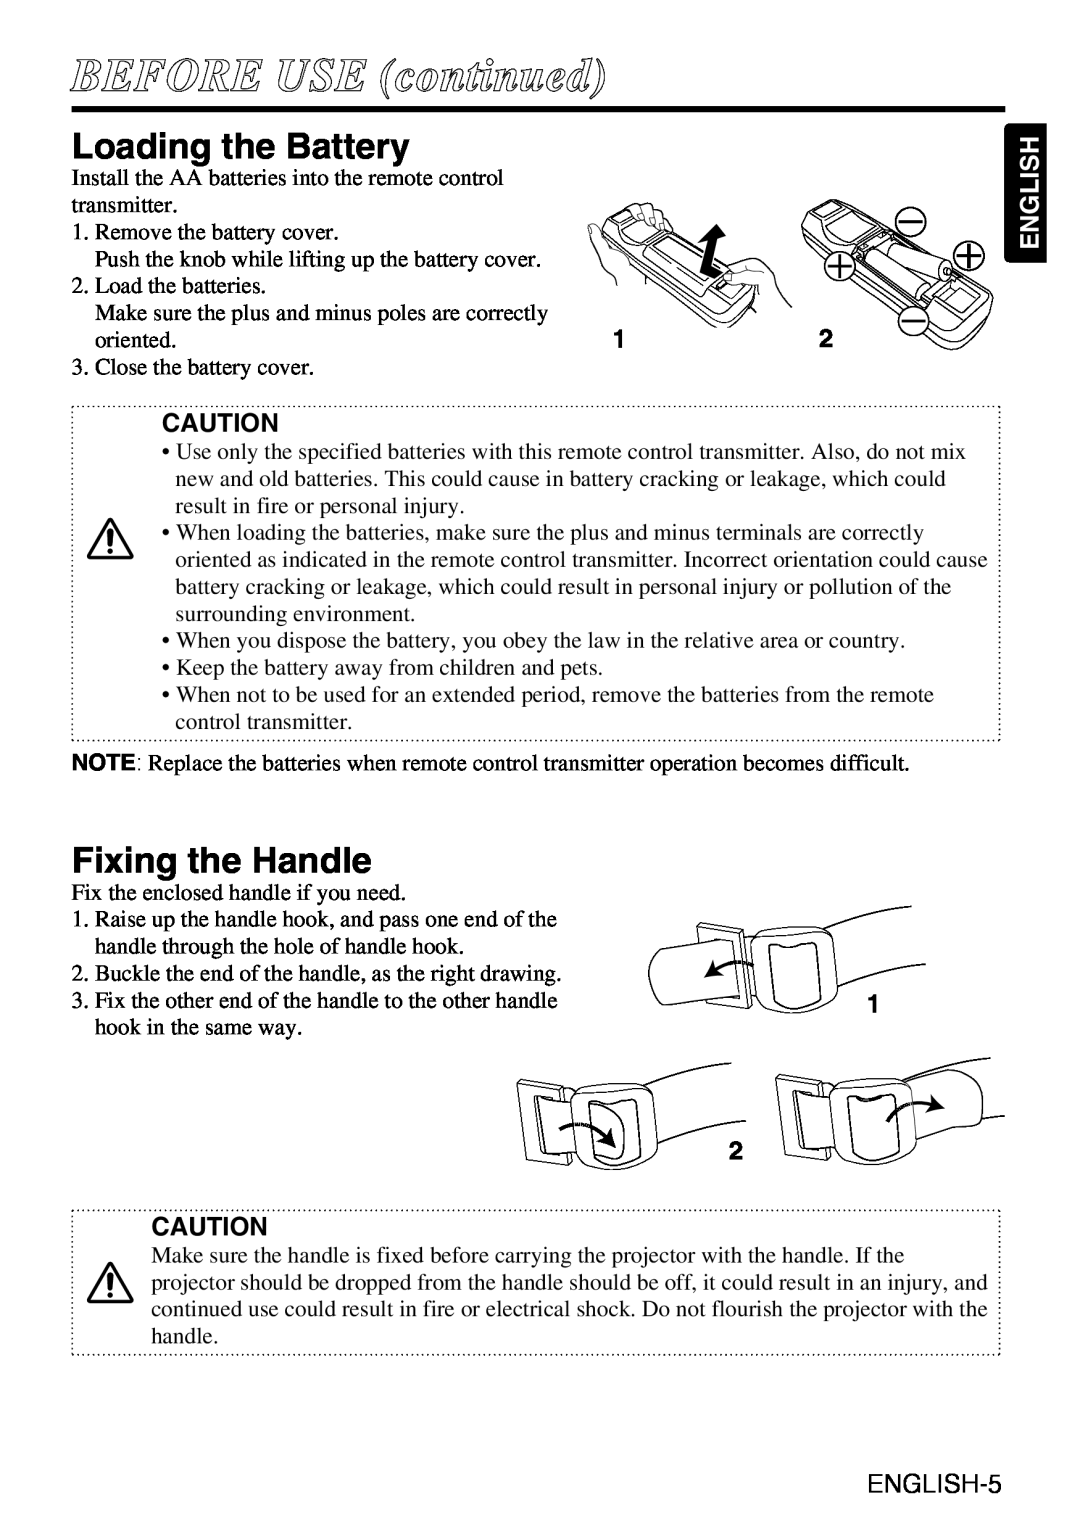 Liesegang dv335 user manual Loading the Battery, Fixing the Handle, ENGLISH-5, BEFORE USE continued, English 